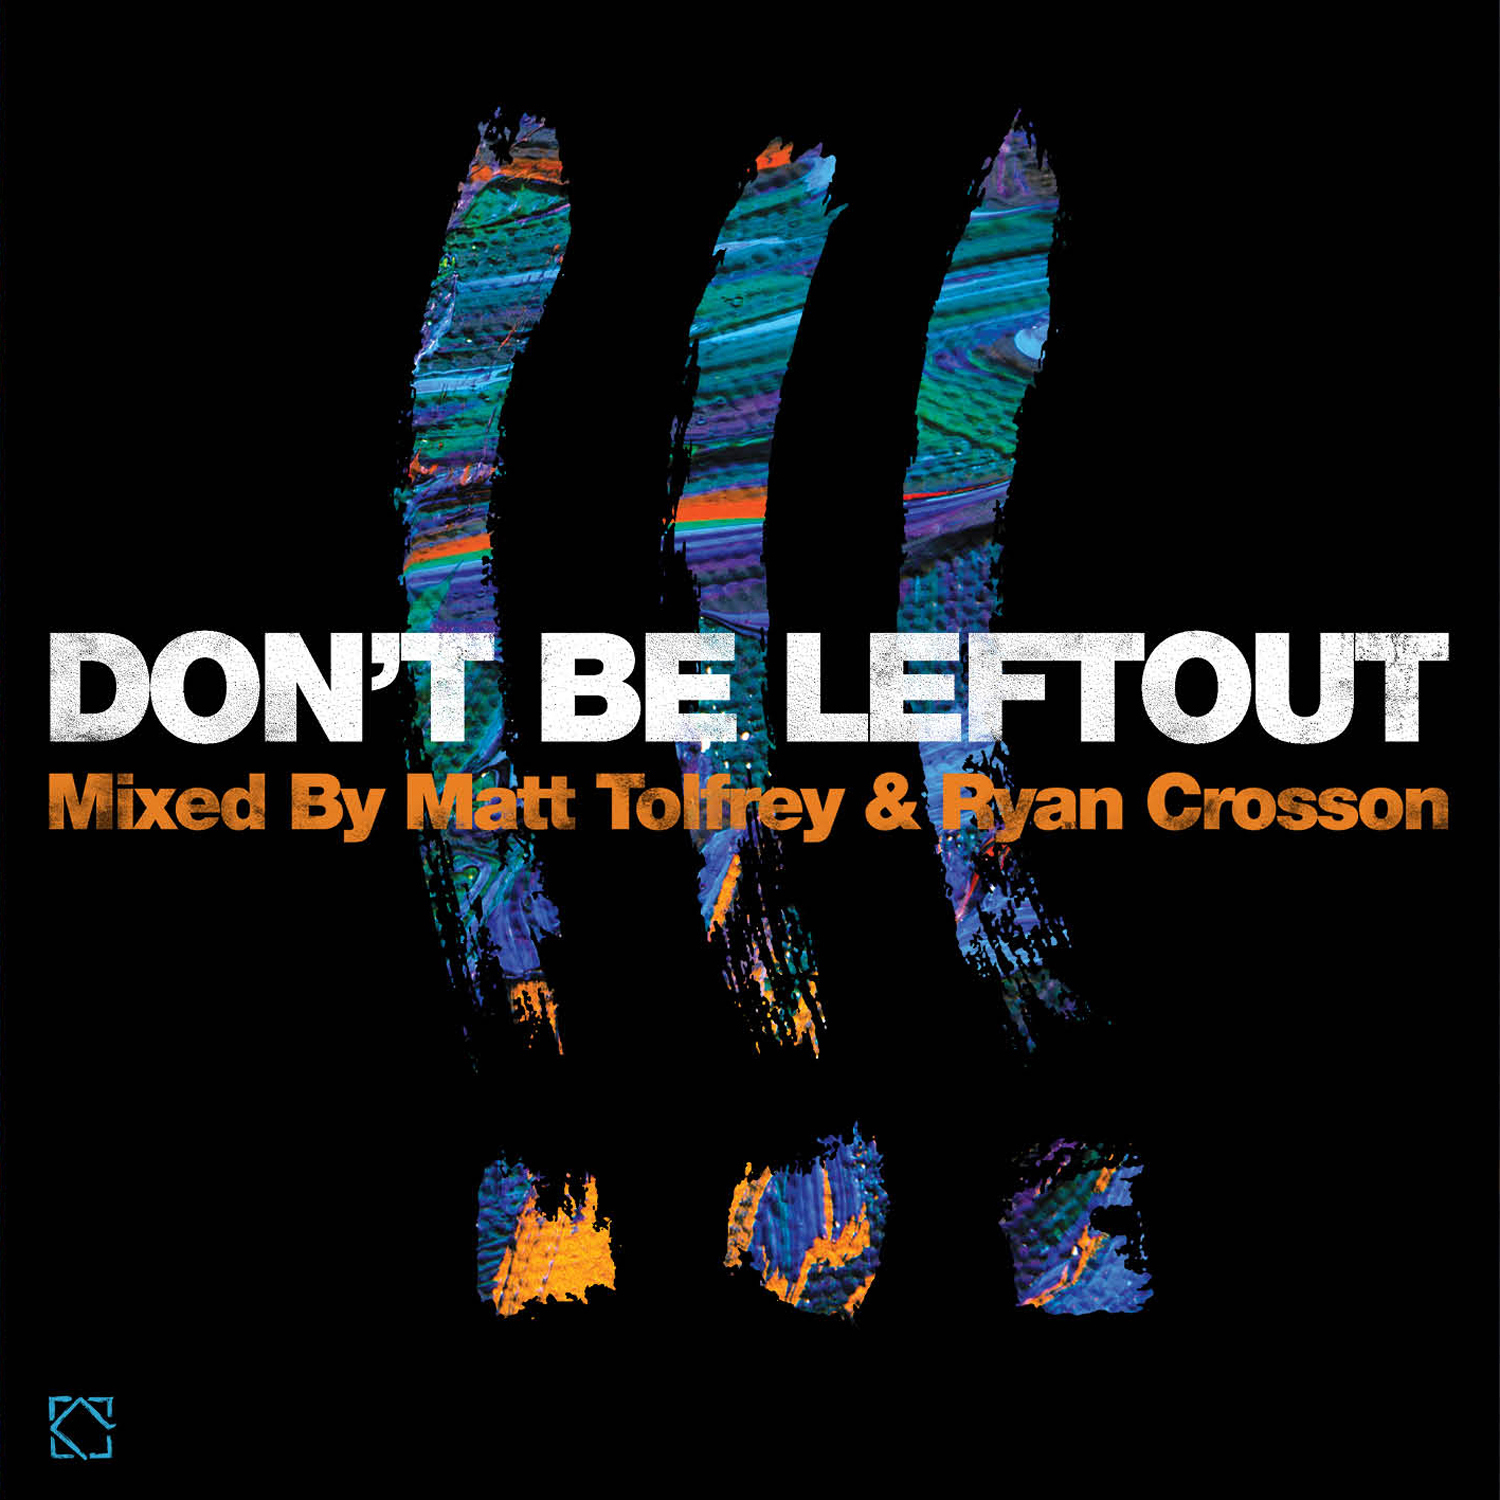 Don't Be Leftout mixed by Matt Tolfrey & Ryan Crosson (Continous Mix)